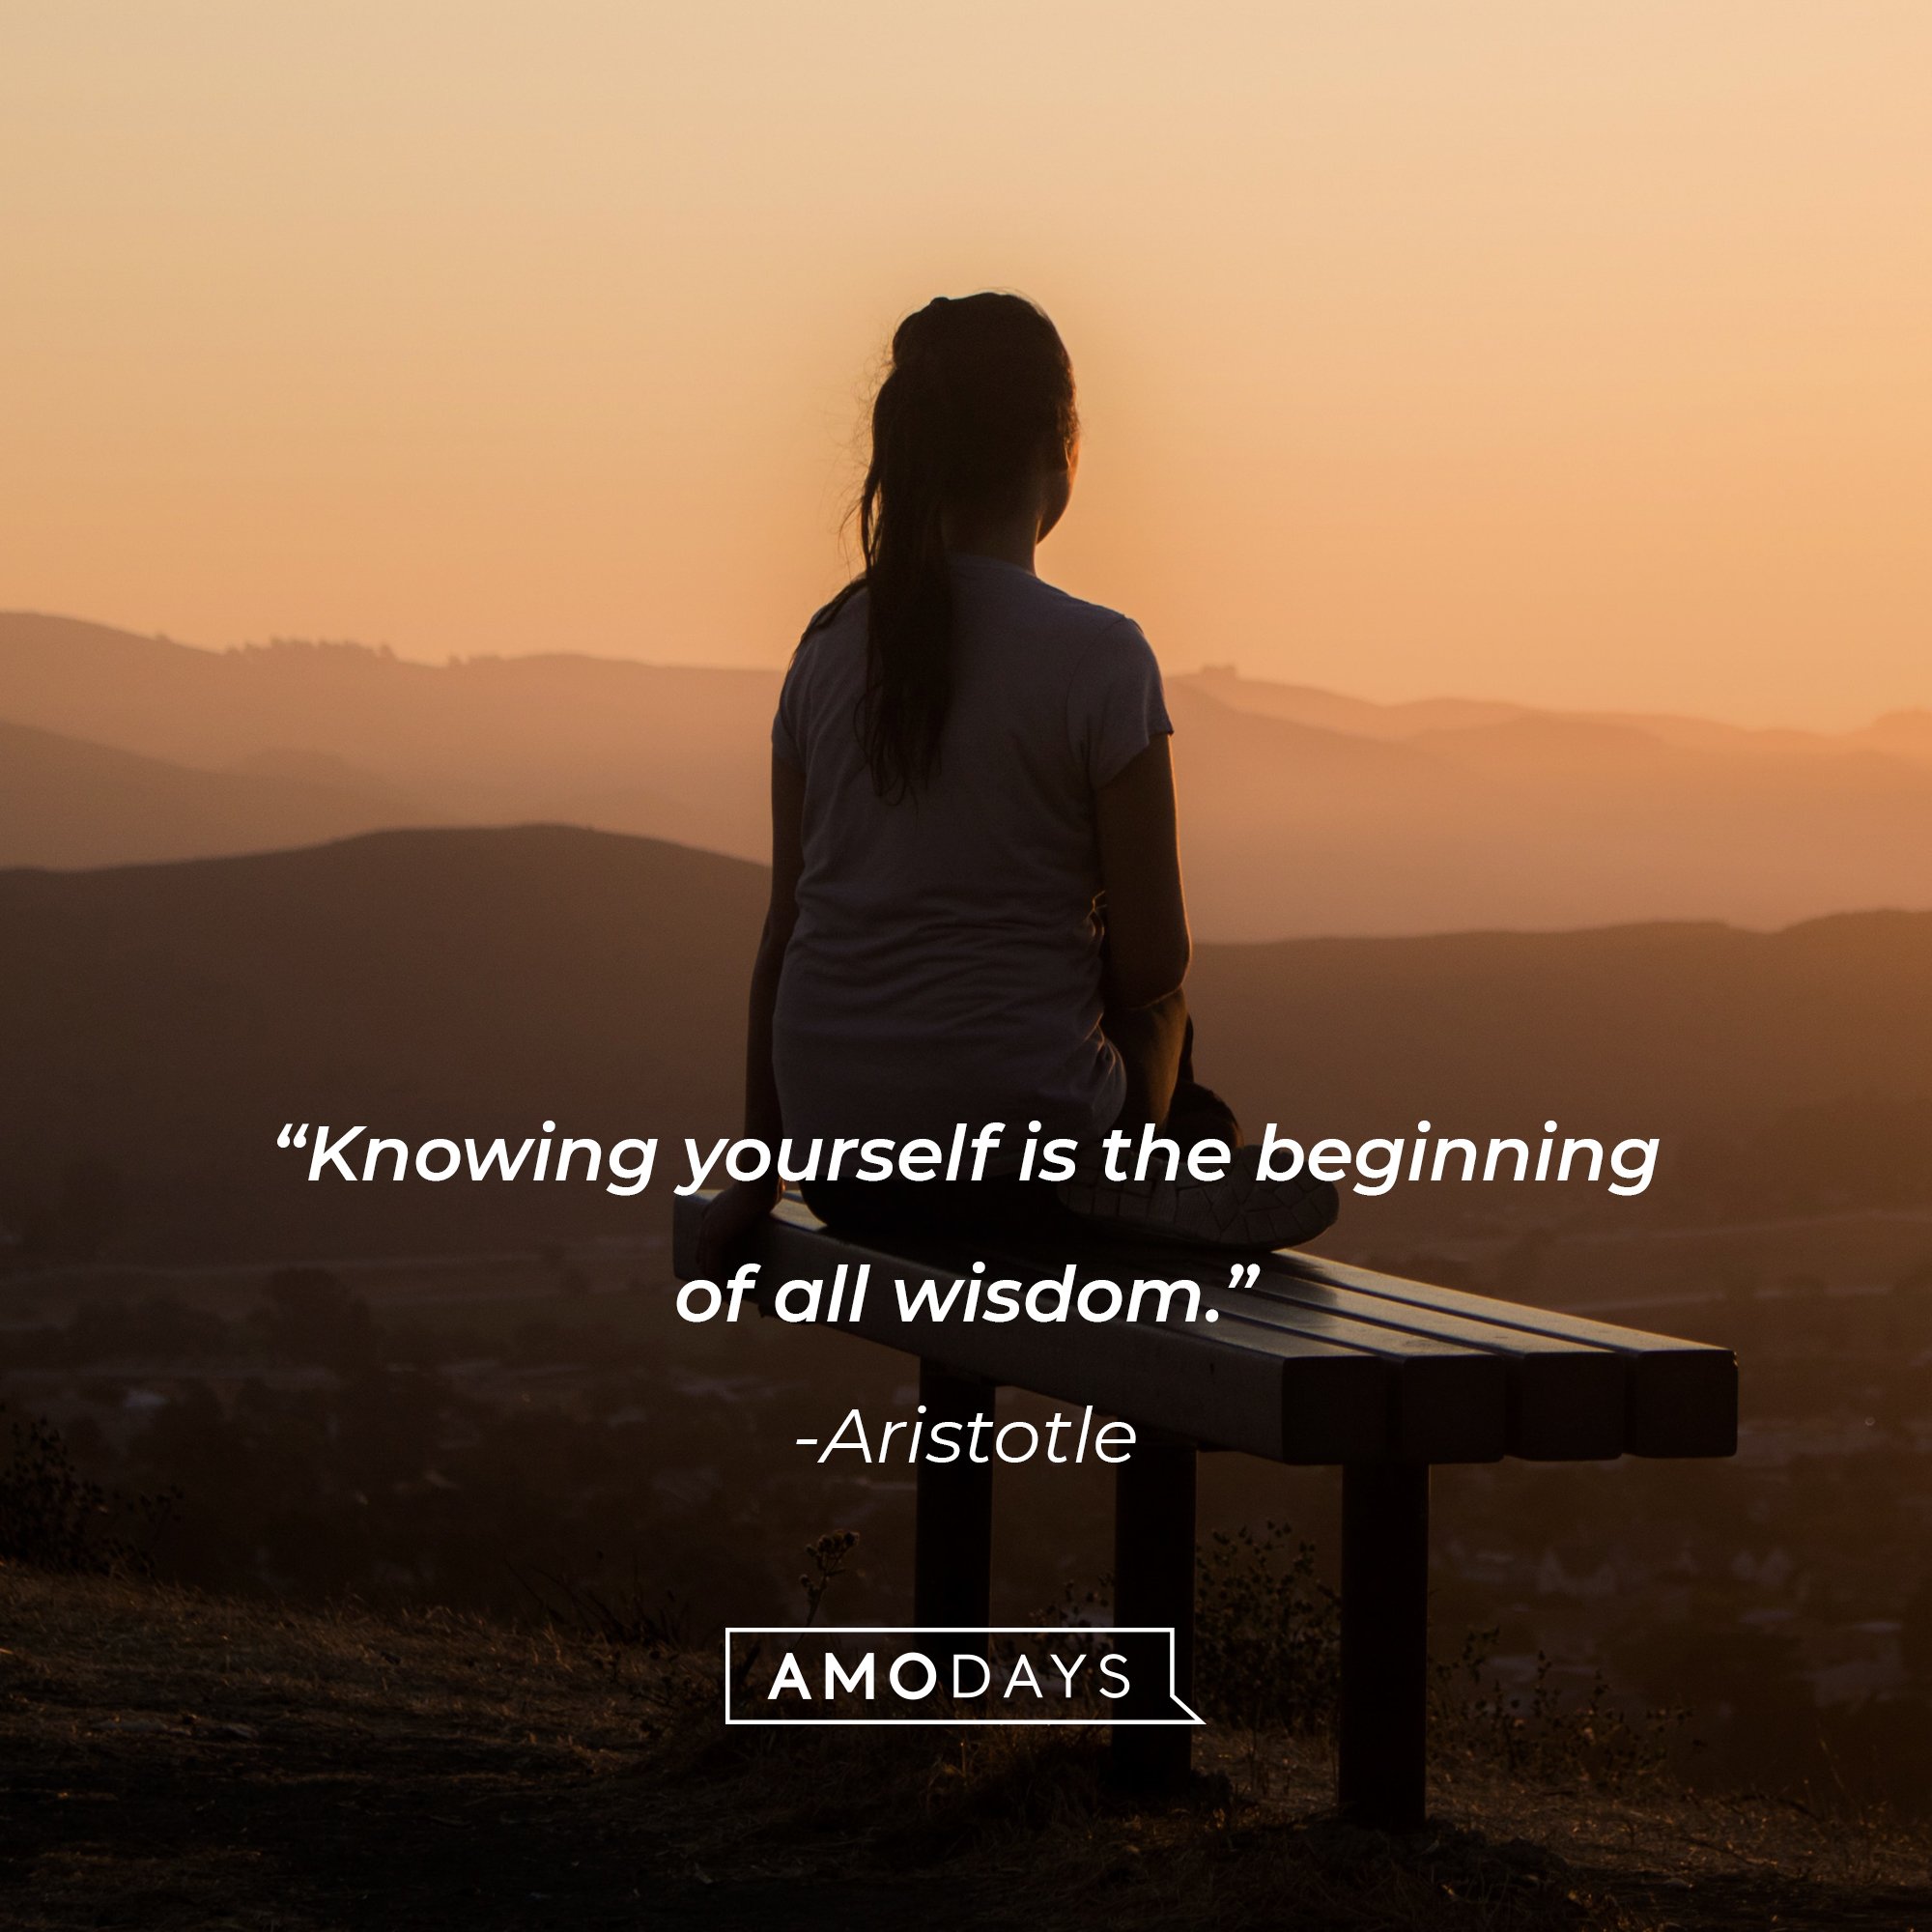  Aristotle's quote: “Knowing yourself is the beginning of all wisdom.”| Image: AmoDays